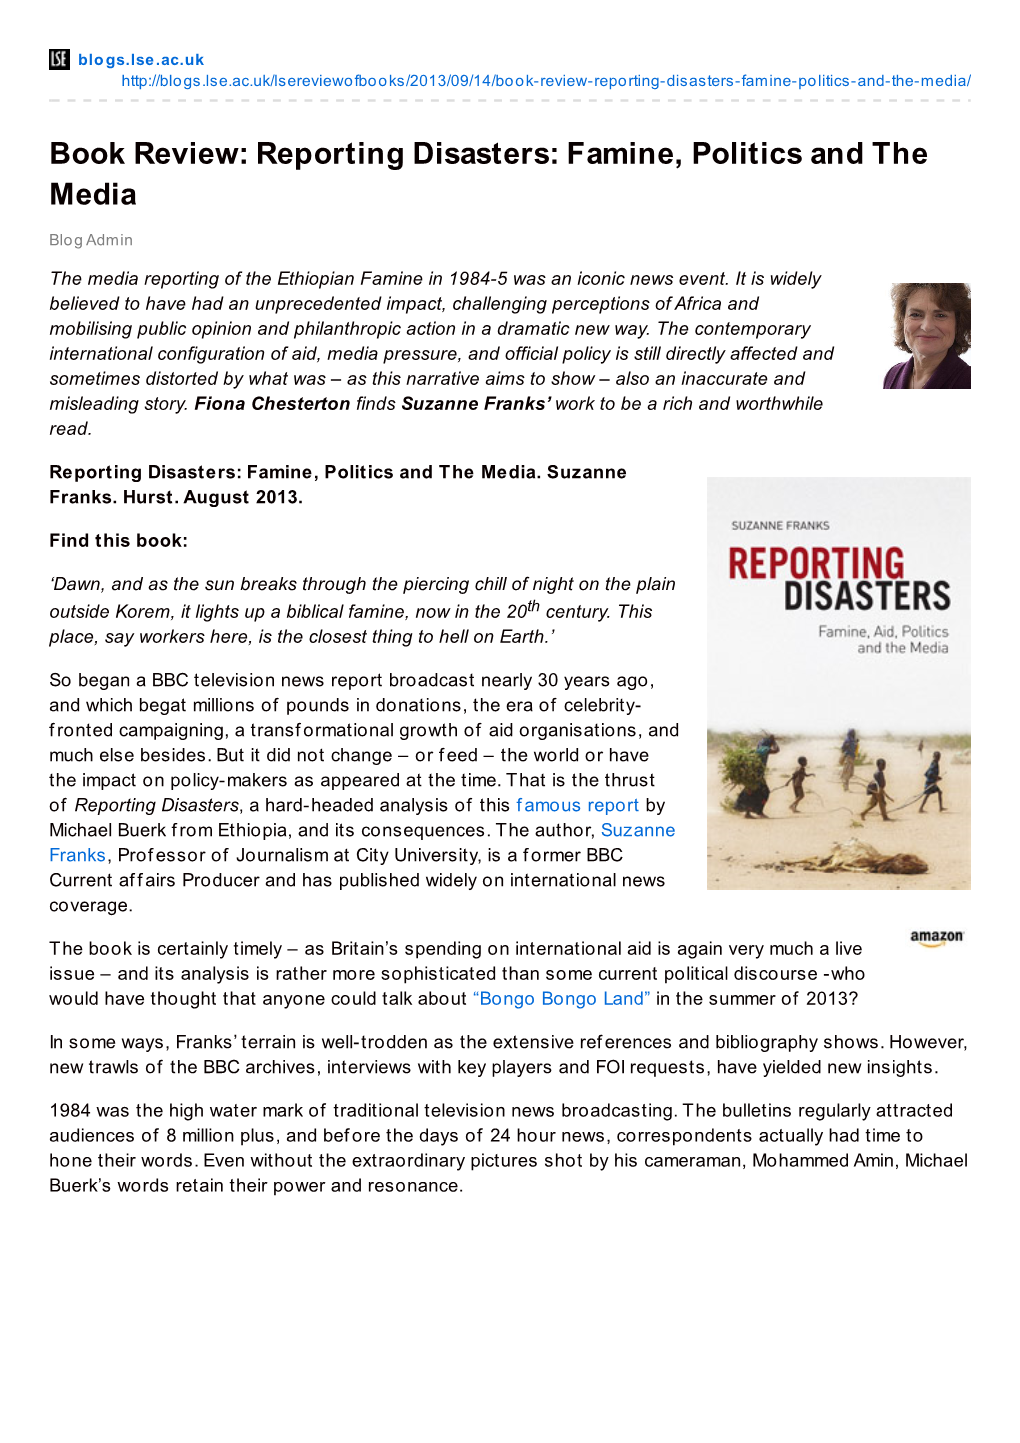 Book Review: Reporting Disasters: Famine, Politics and the Media